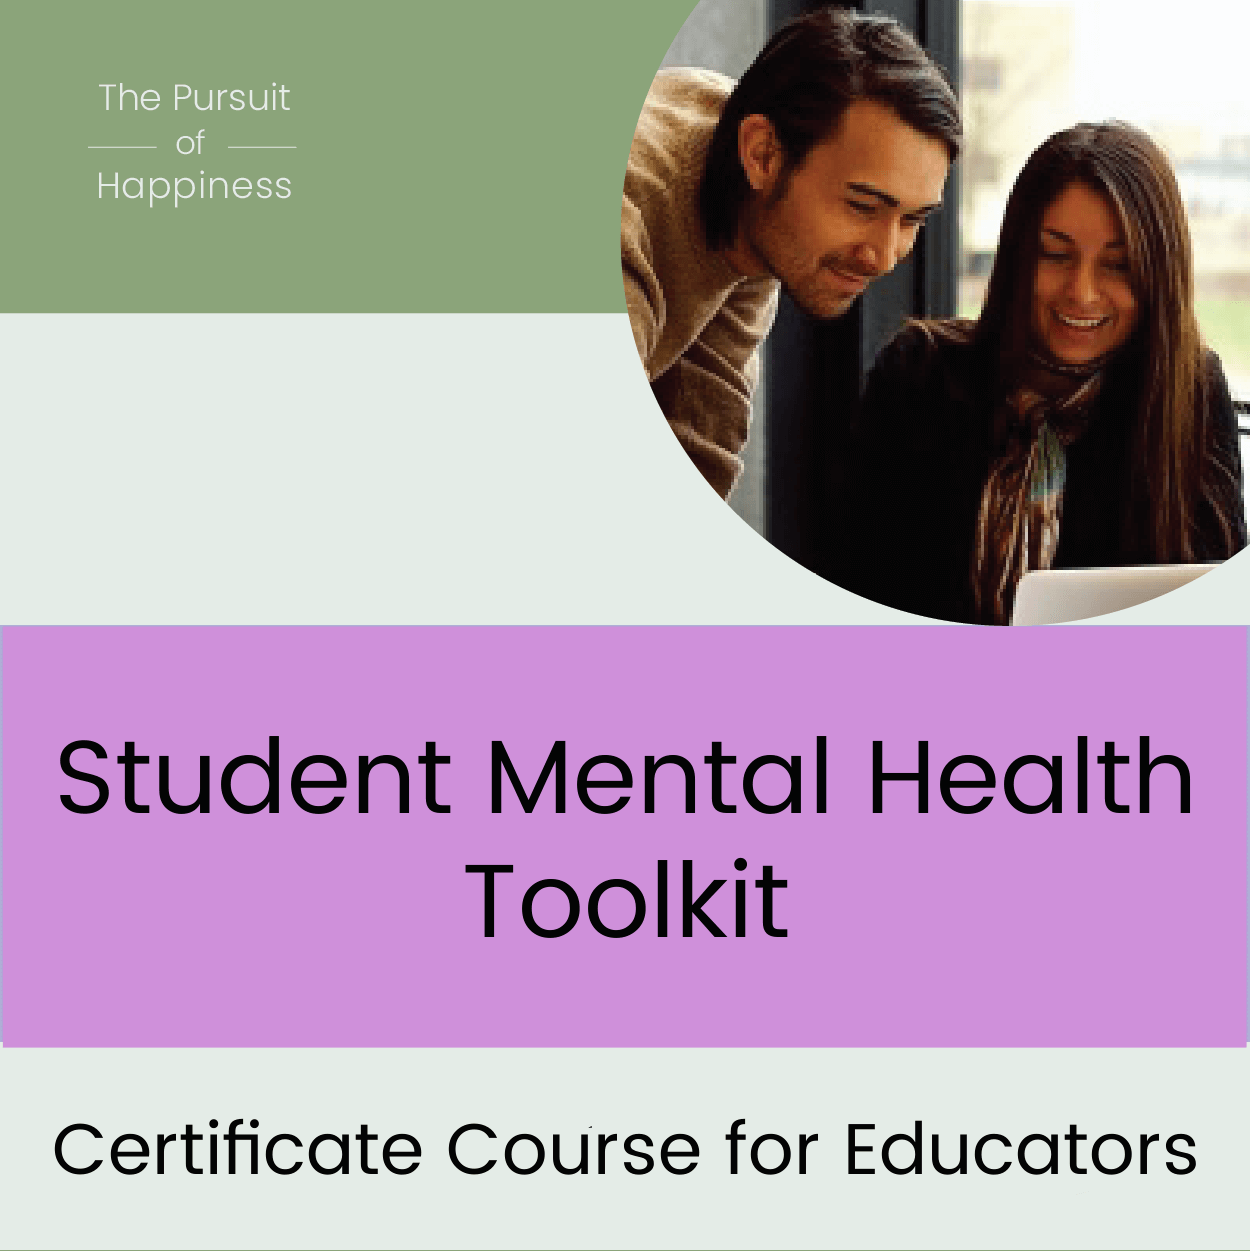 student mental health and wellbeing toolkit